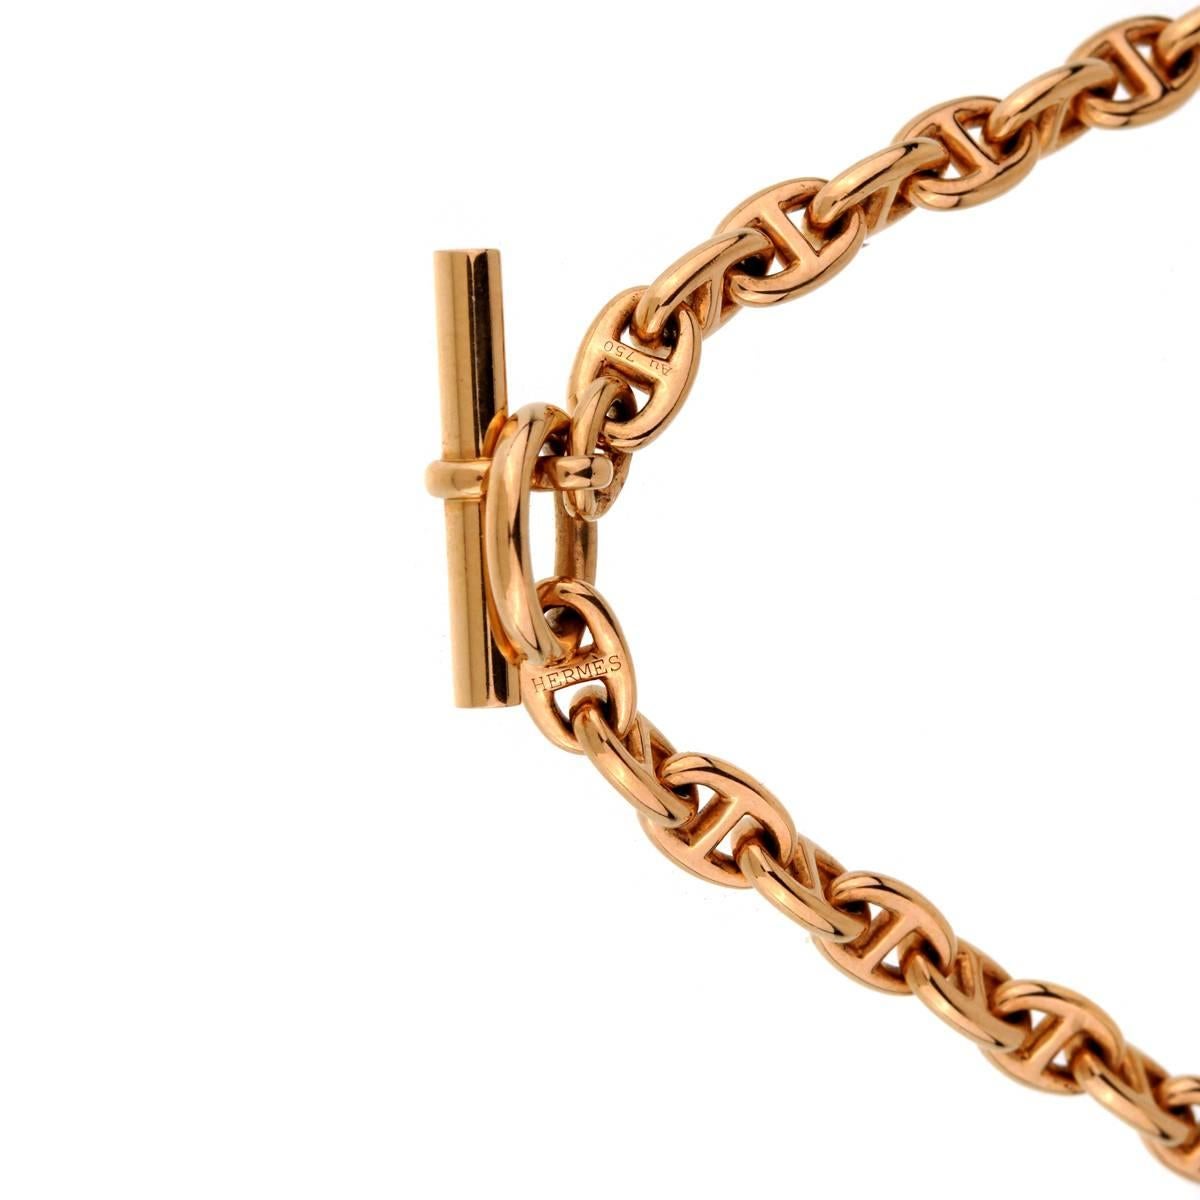 A fabulous Hermes necklace from the Chaine d'Ancre collection taking inspiration from a ship anchor chain, showcasing polished 18k rose gold. 

Sku:906

NECKLACE WIDTH .23